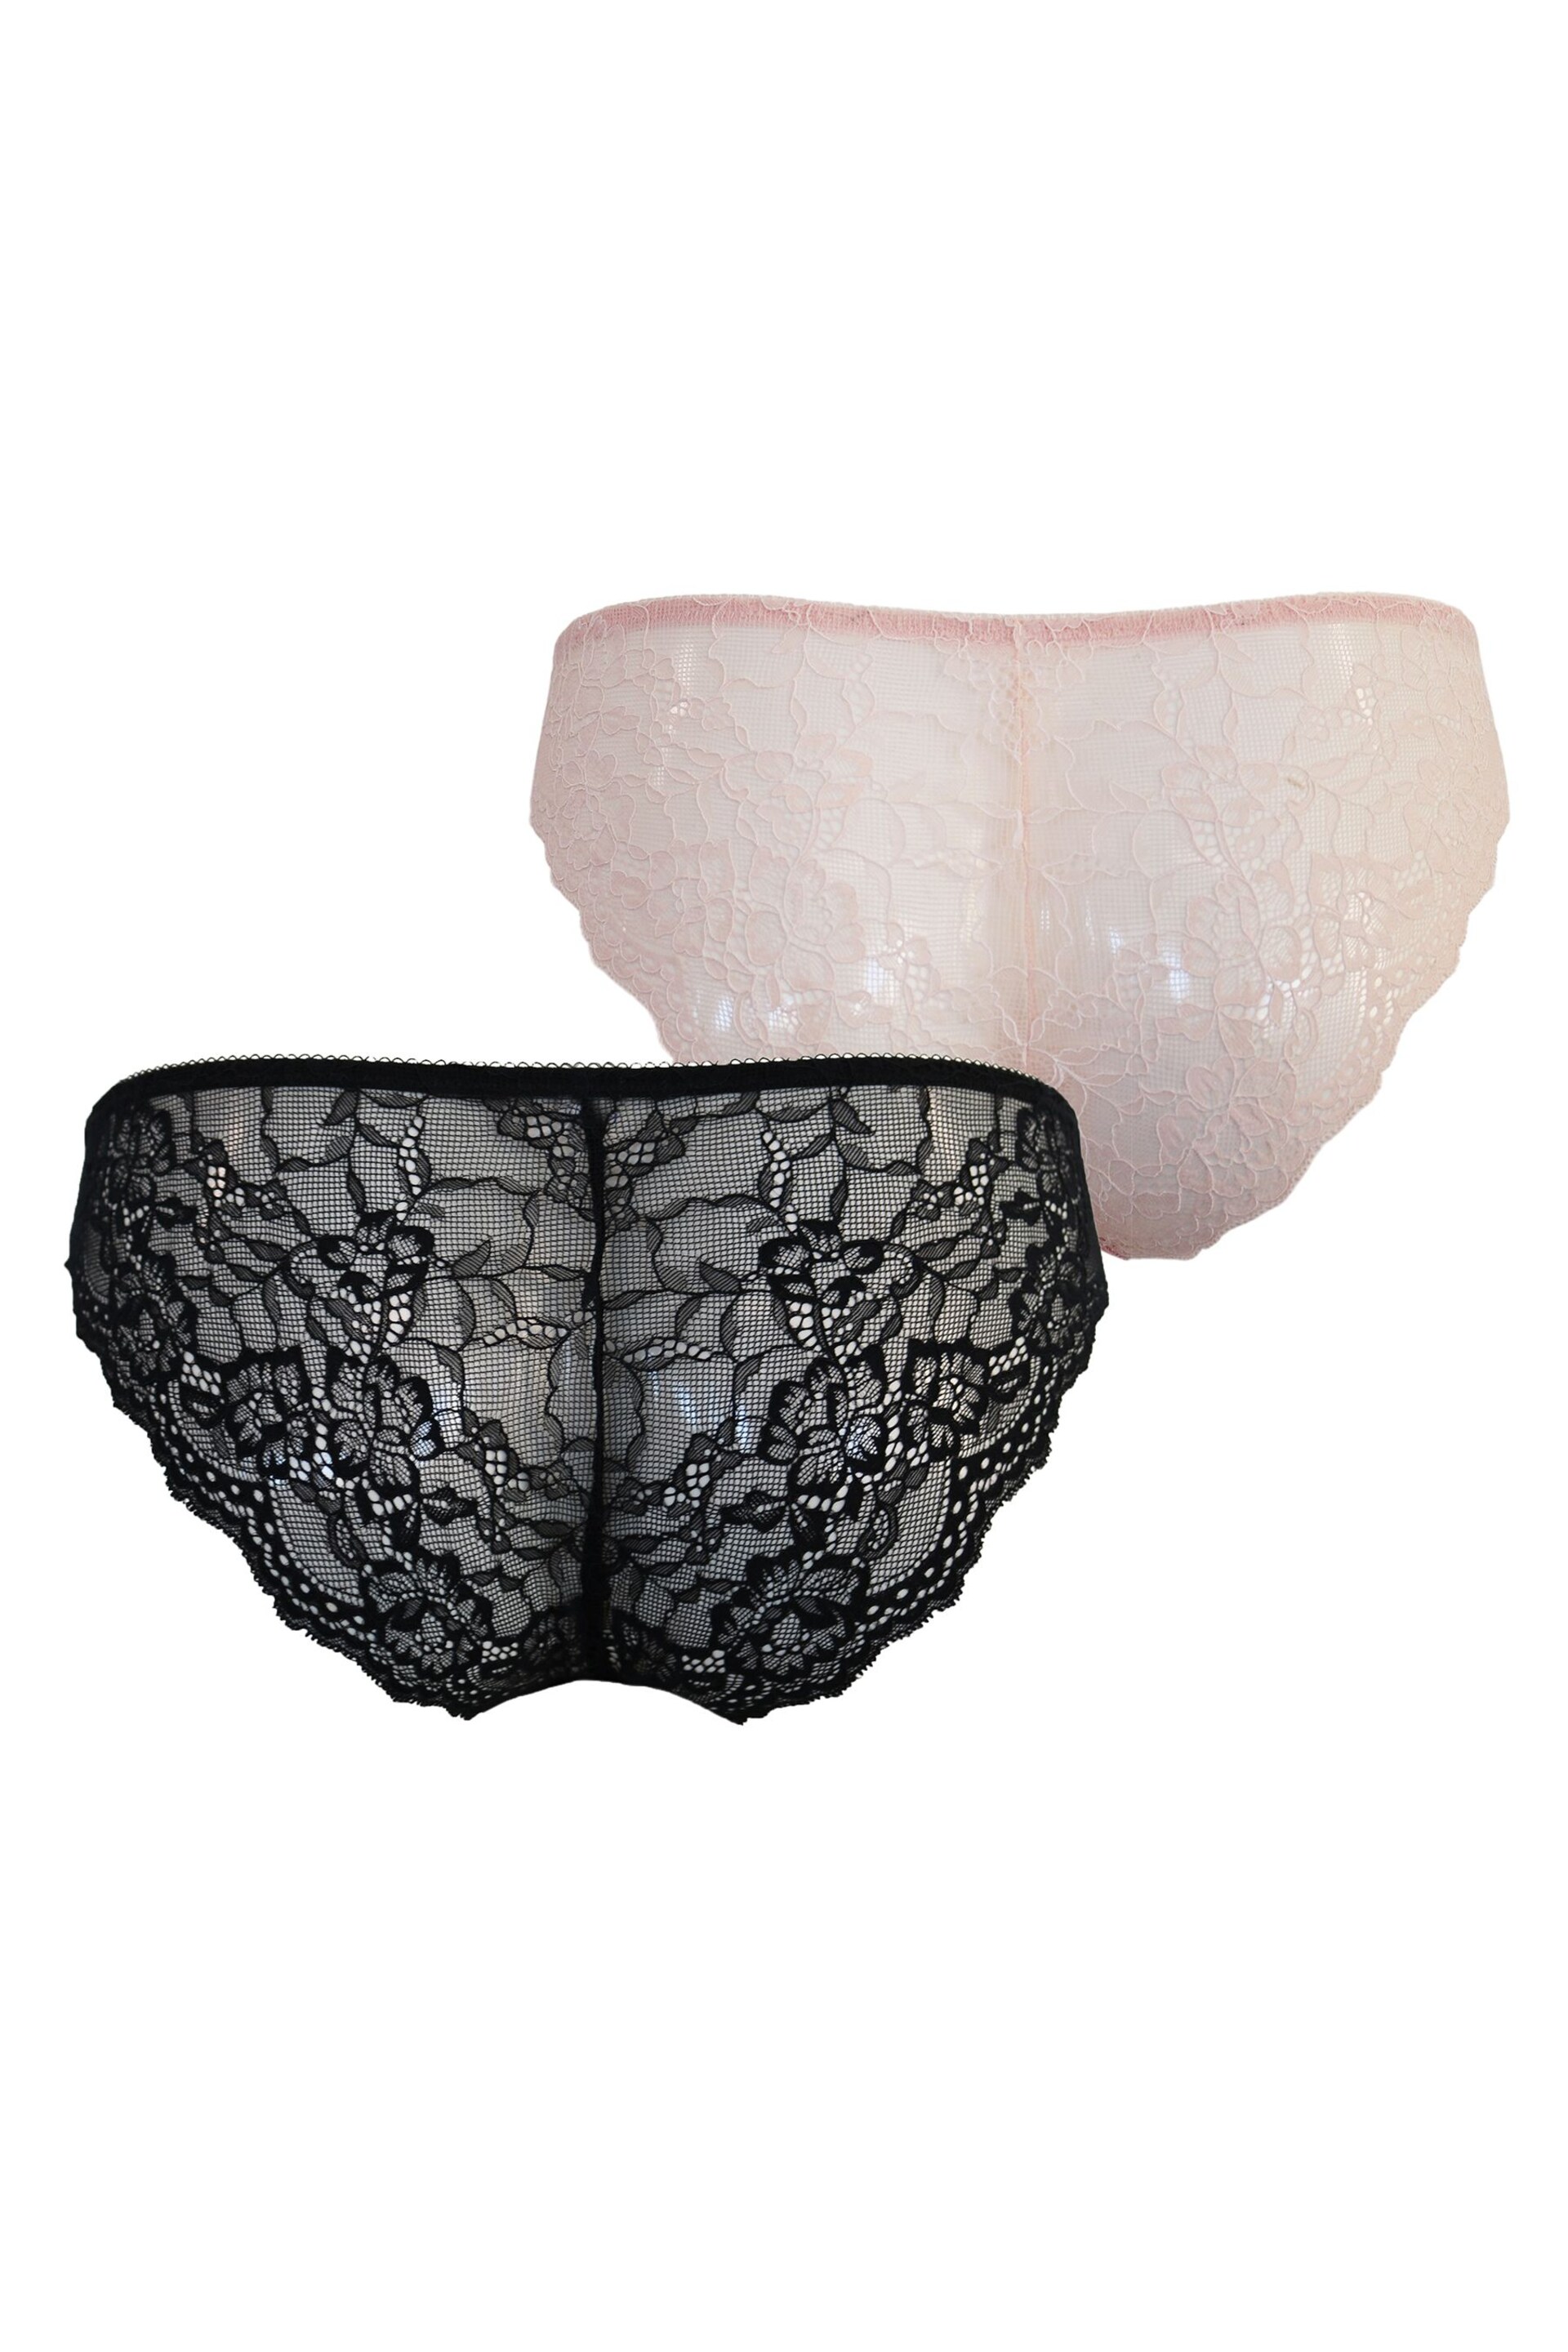 Pour Moi Black Brazilian Mesh and Lace Knickers 2 Pack - Image 2 of 4